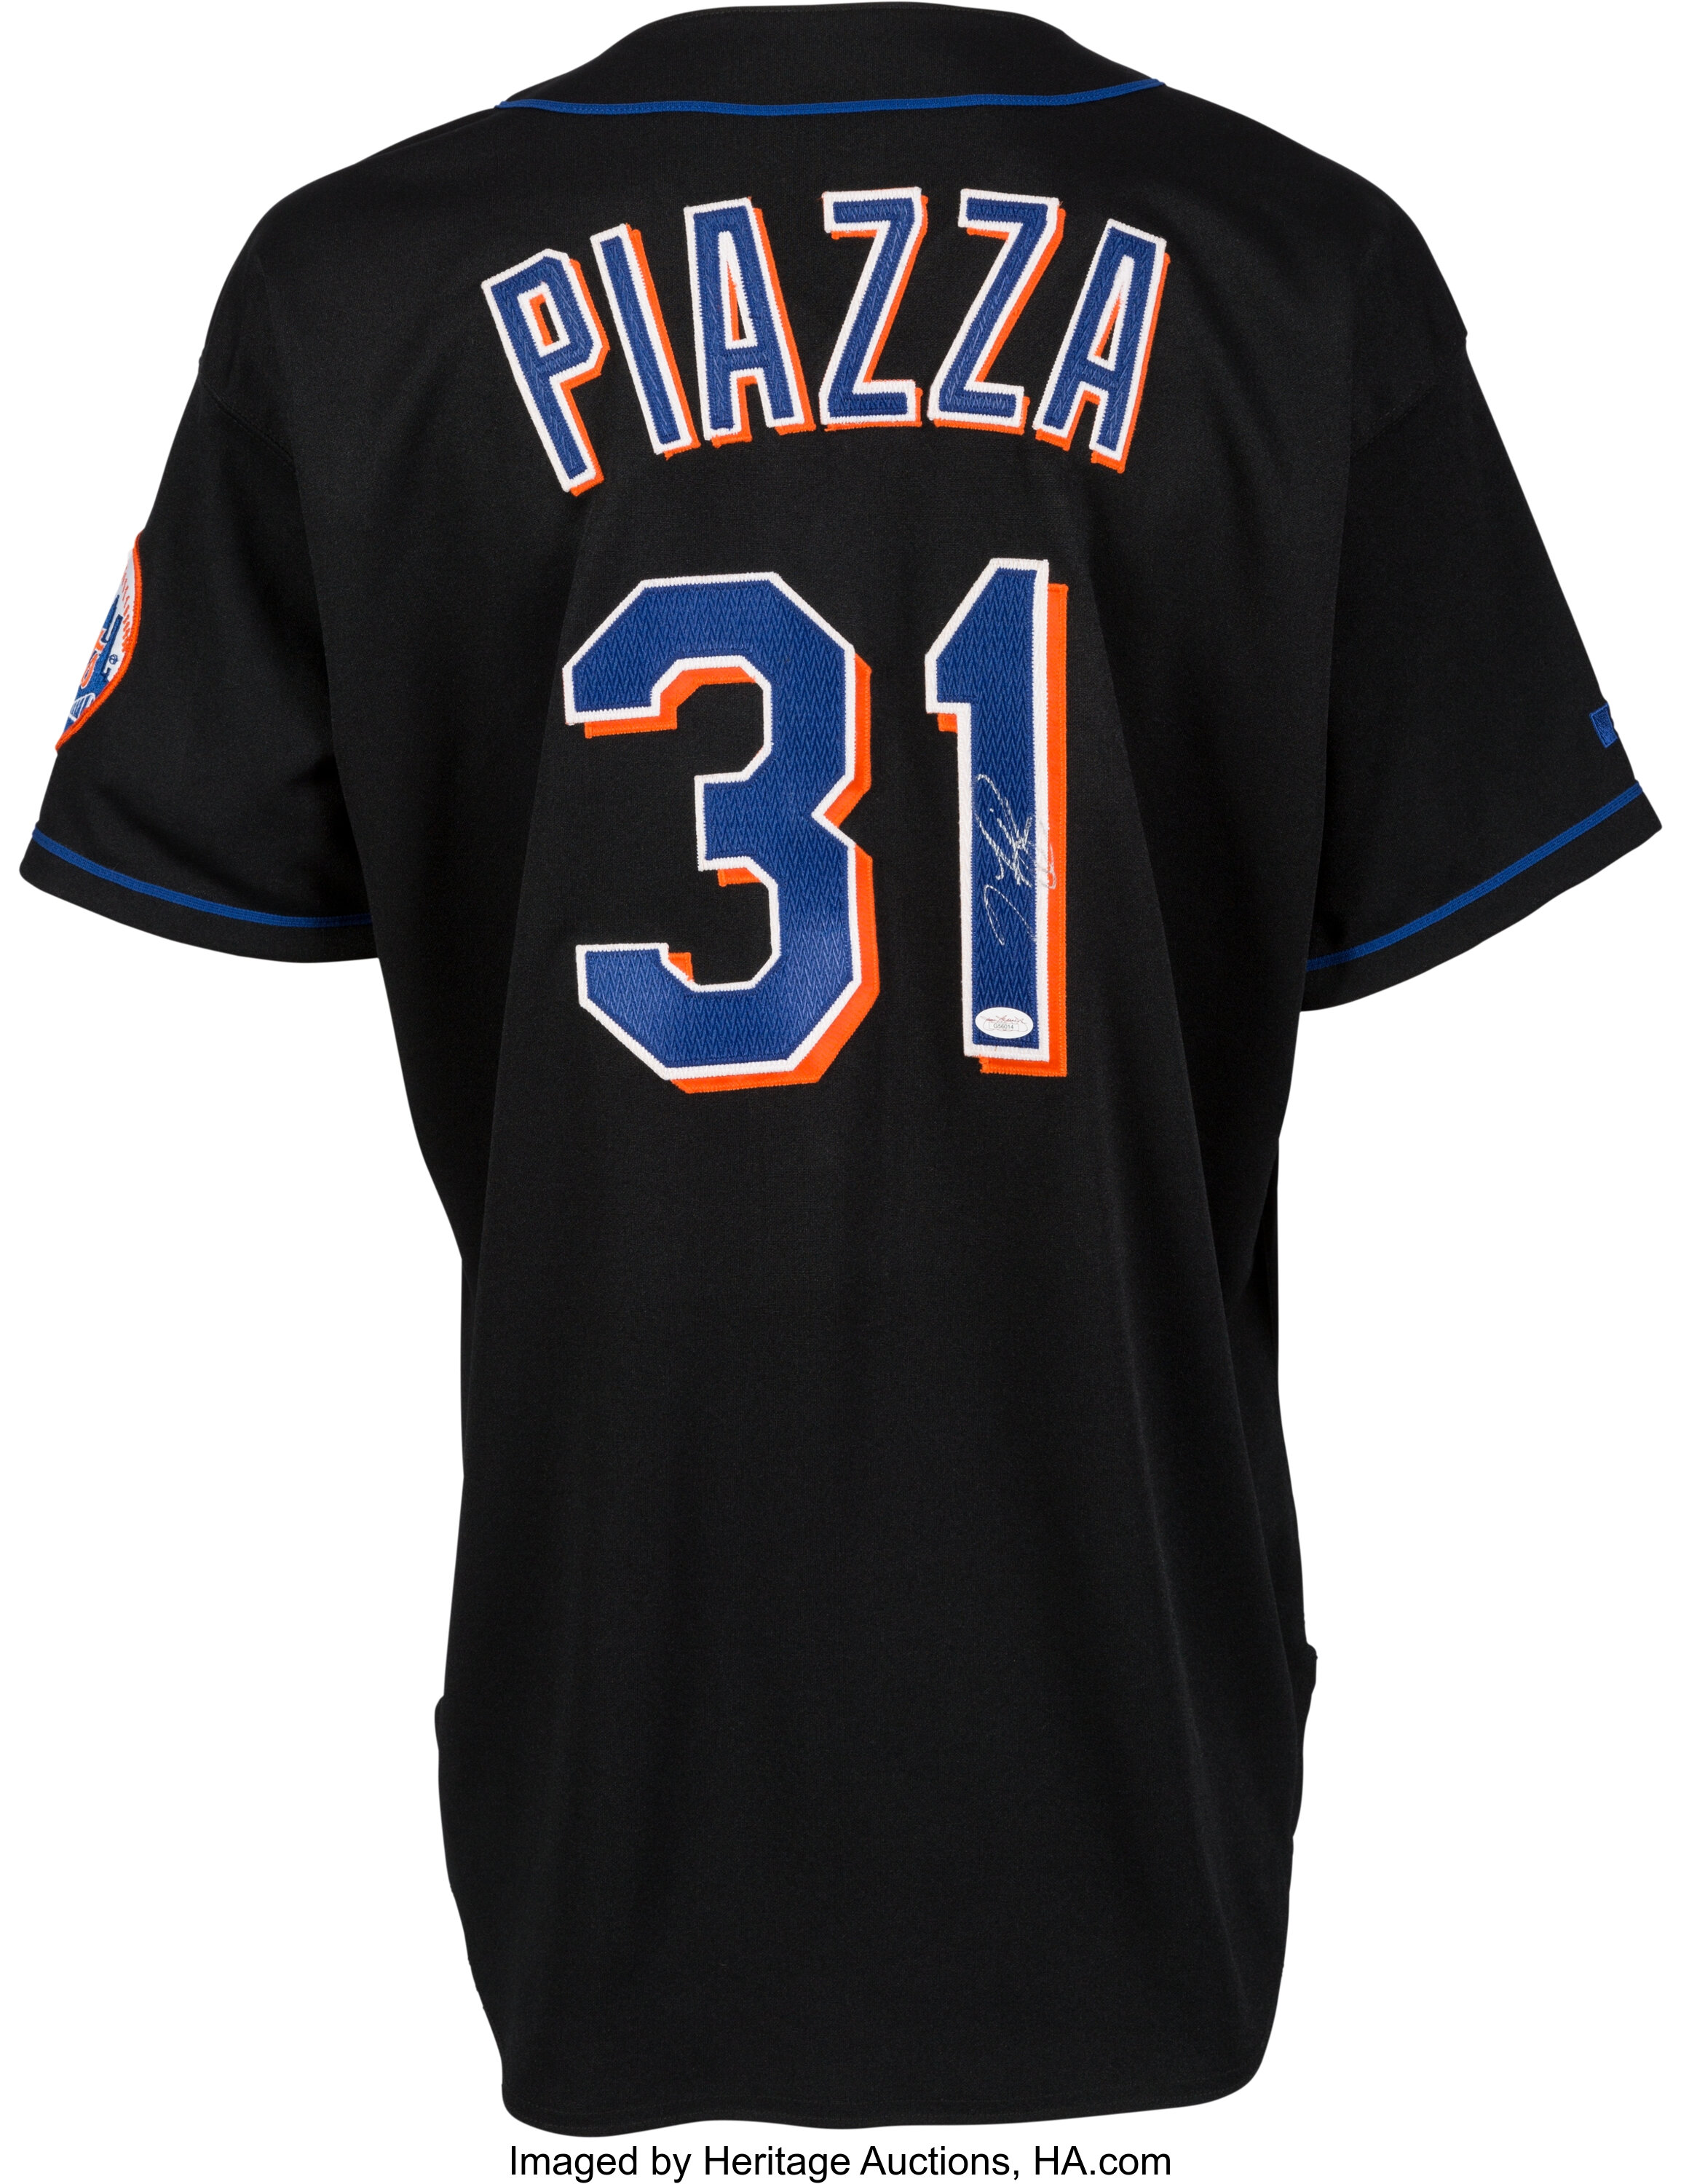 1998 Mike Piazza Game Worn New York Mets Jersey. Baseball